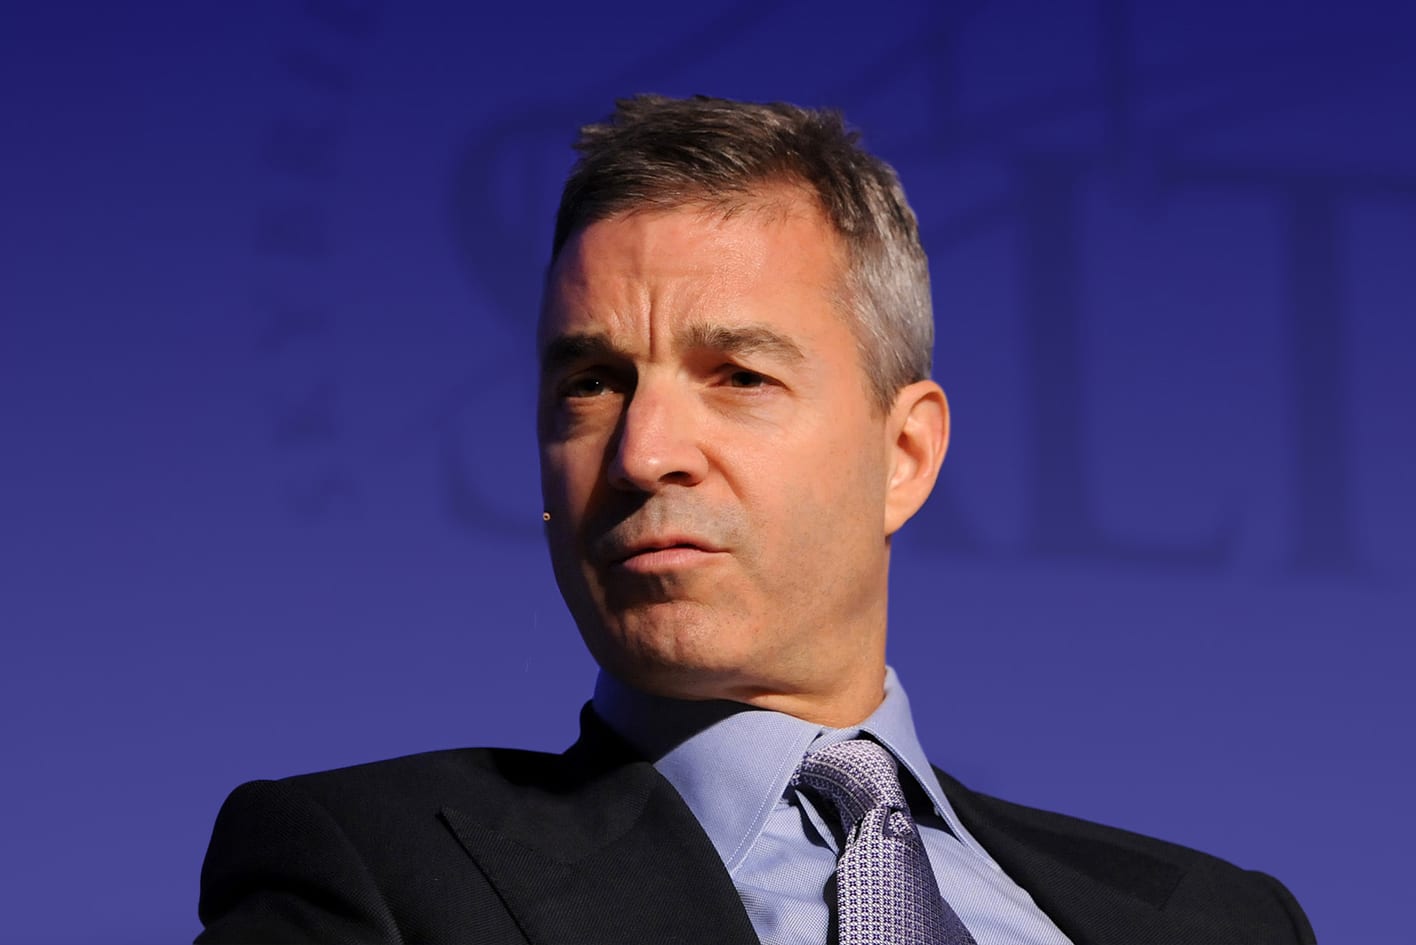 Dan Loeb says he's ready to wage a war against Bath & Body Works if necessary